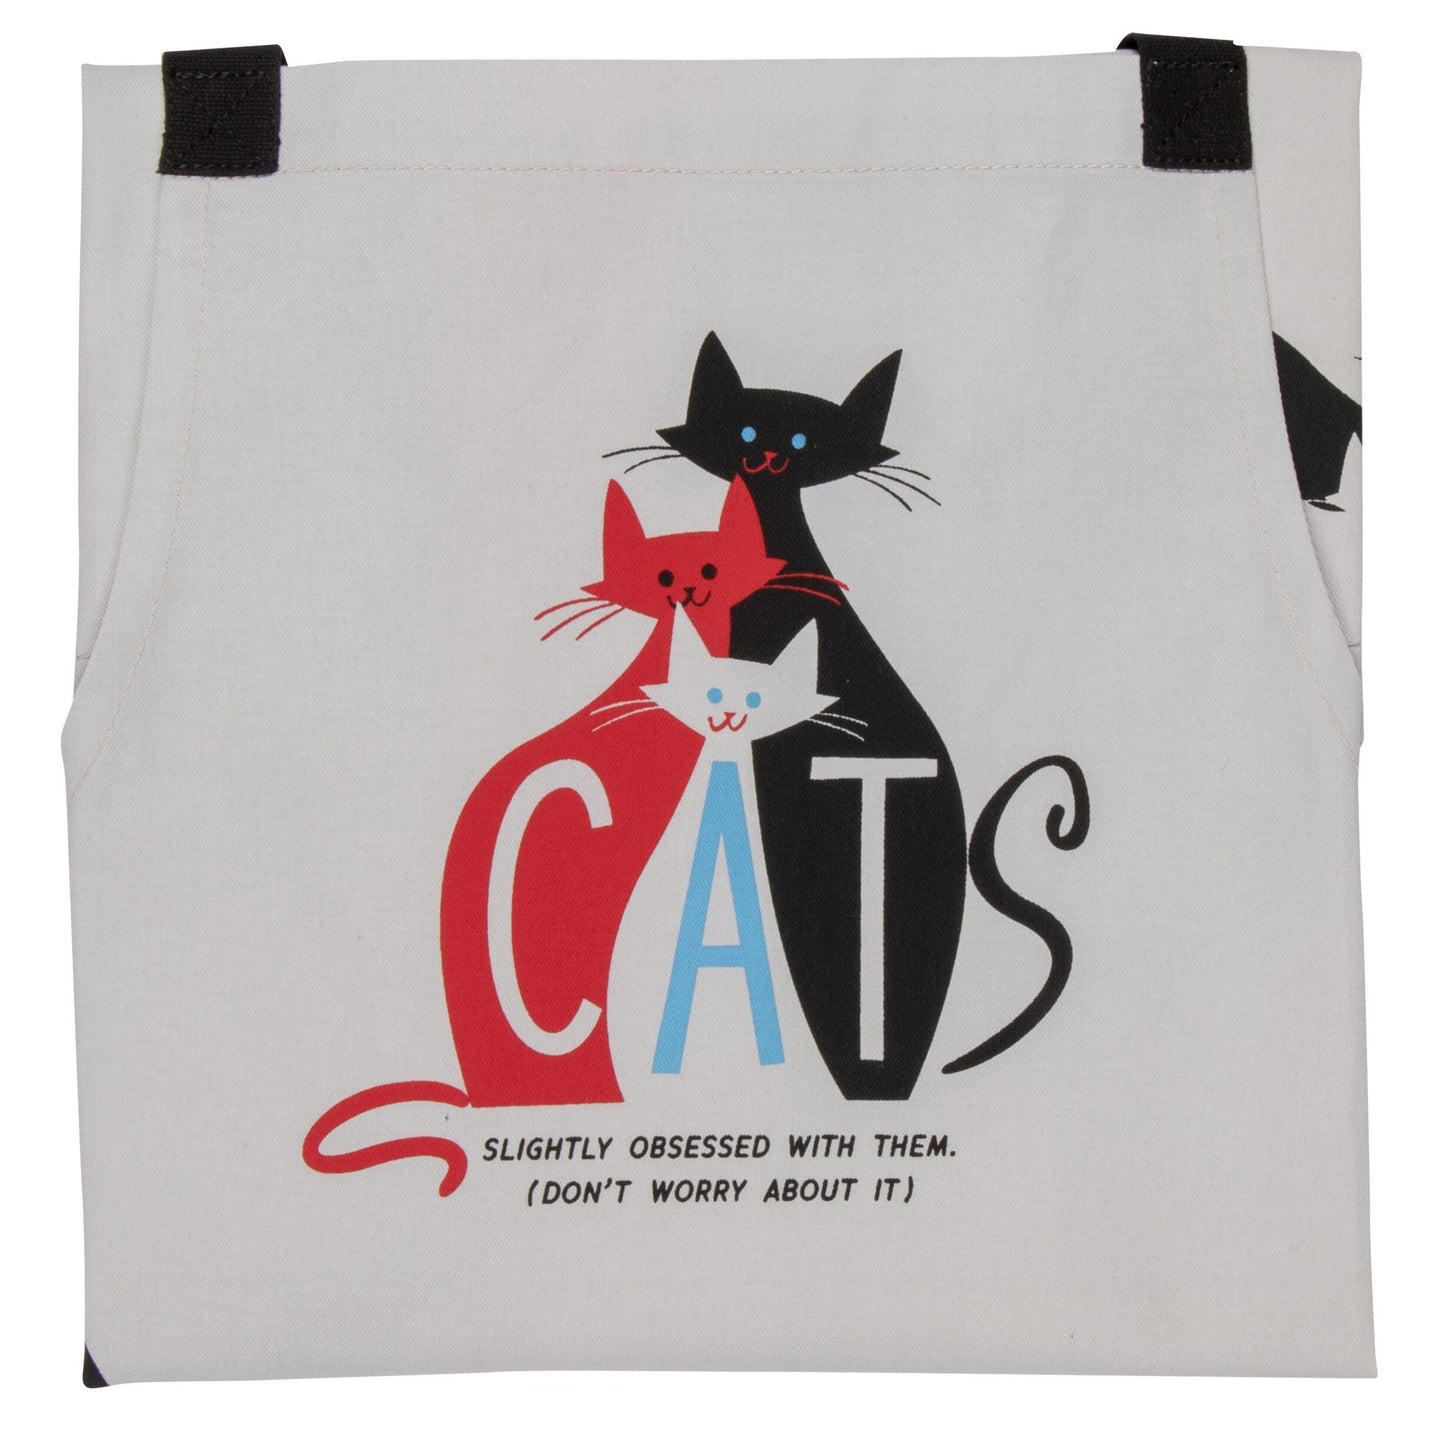 Cats. Slightly Obsessed With Them Funny Cooking and BBQ Apron Unisex 2 Pockets Adjustable Strap 100% Cotton